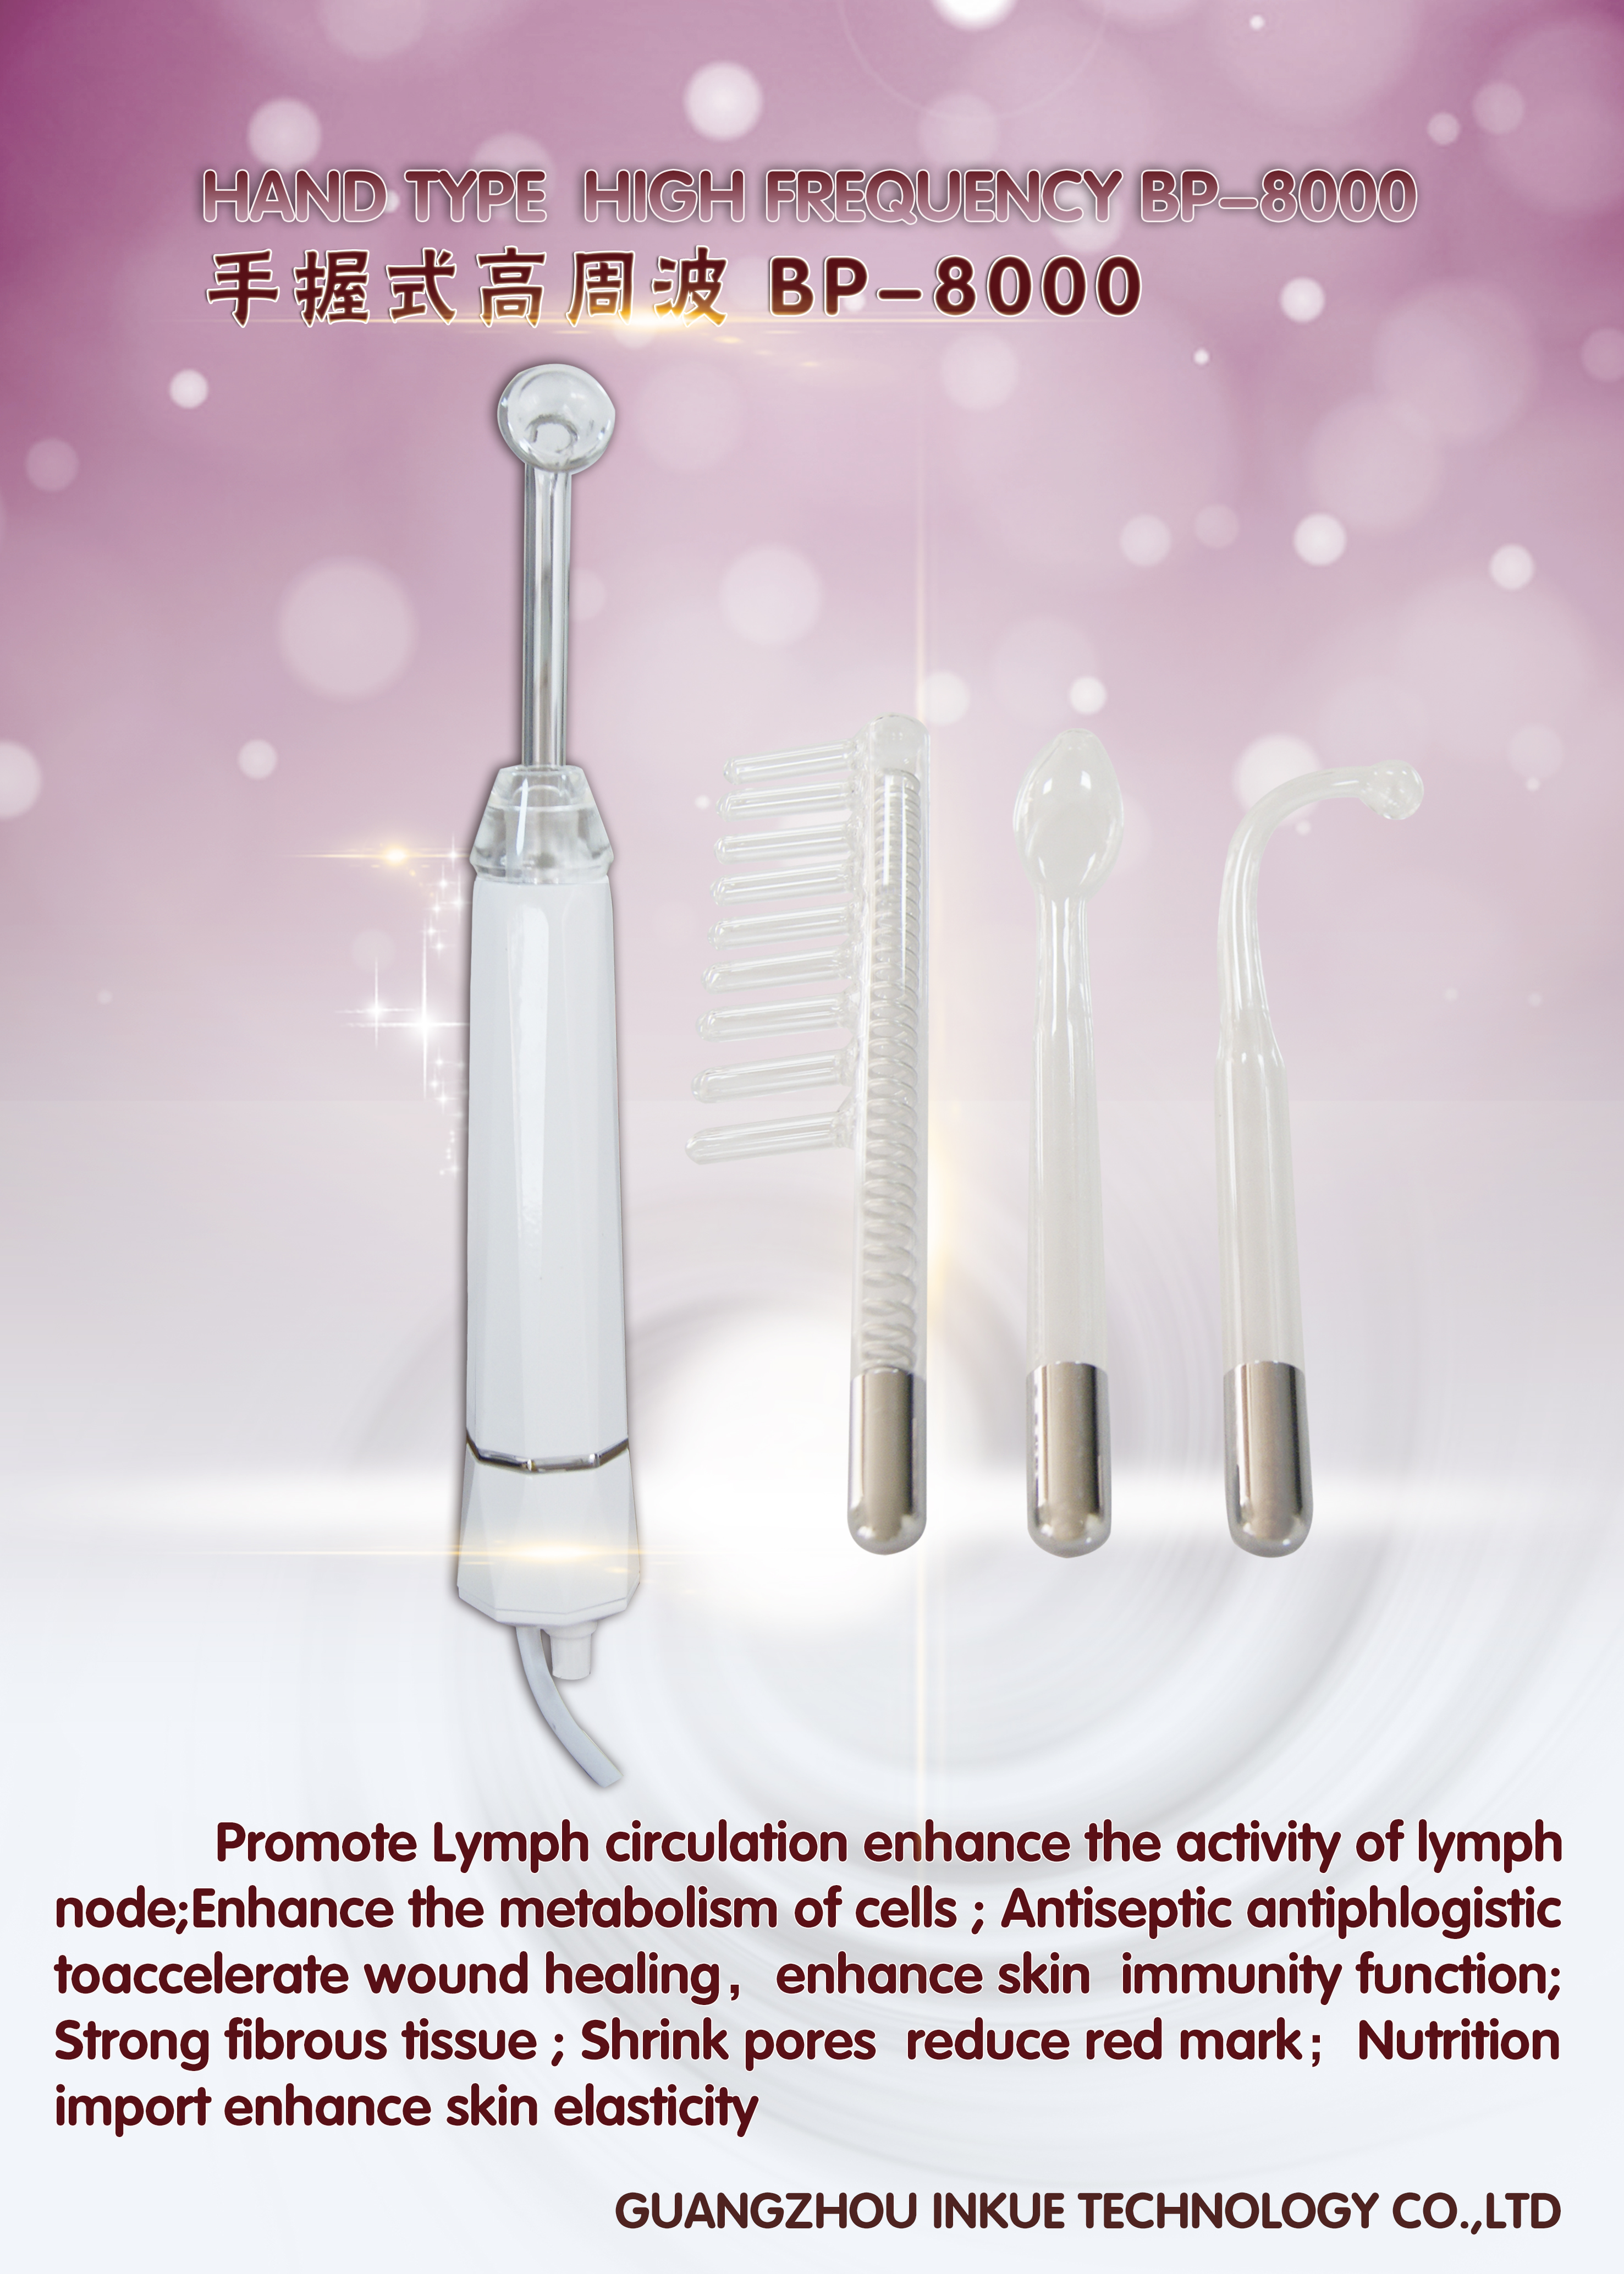 High Frequency Facial Machine, Yofuly Portable Handheld High Frequency Wand Skin Tightening Acne Spot Wrinkles Remover Beauty Therapy Puffy Eyes Body Care Facial Machine